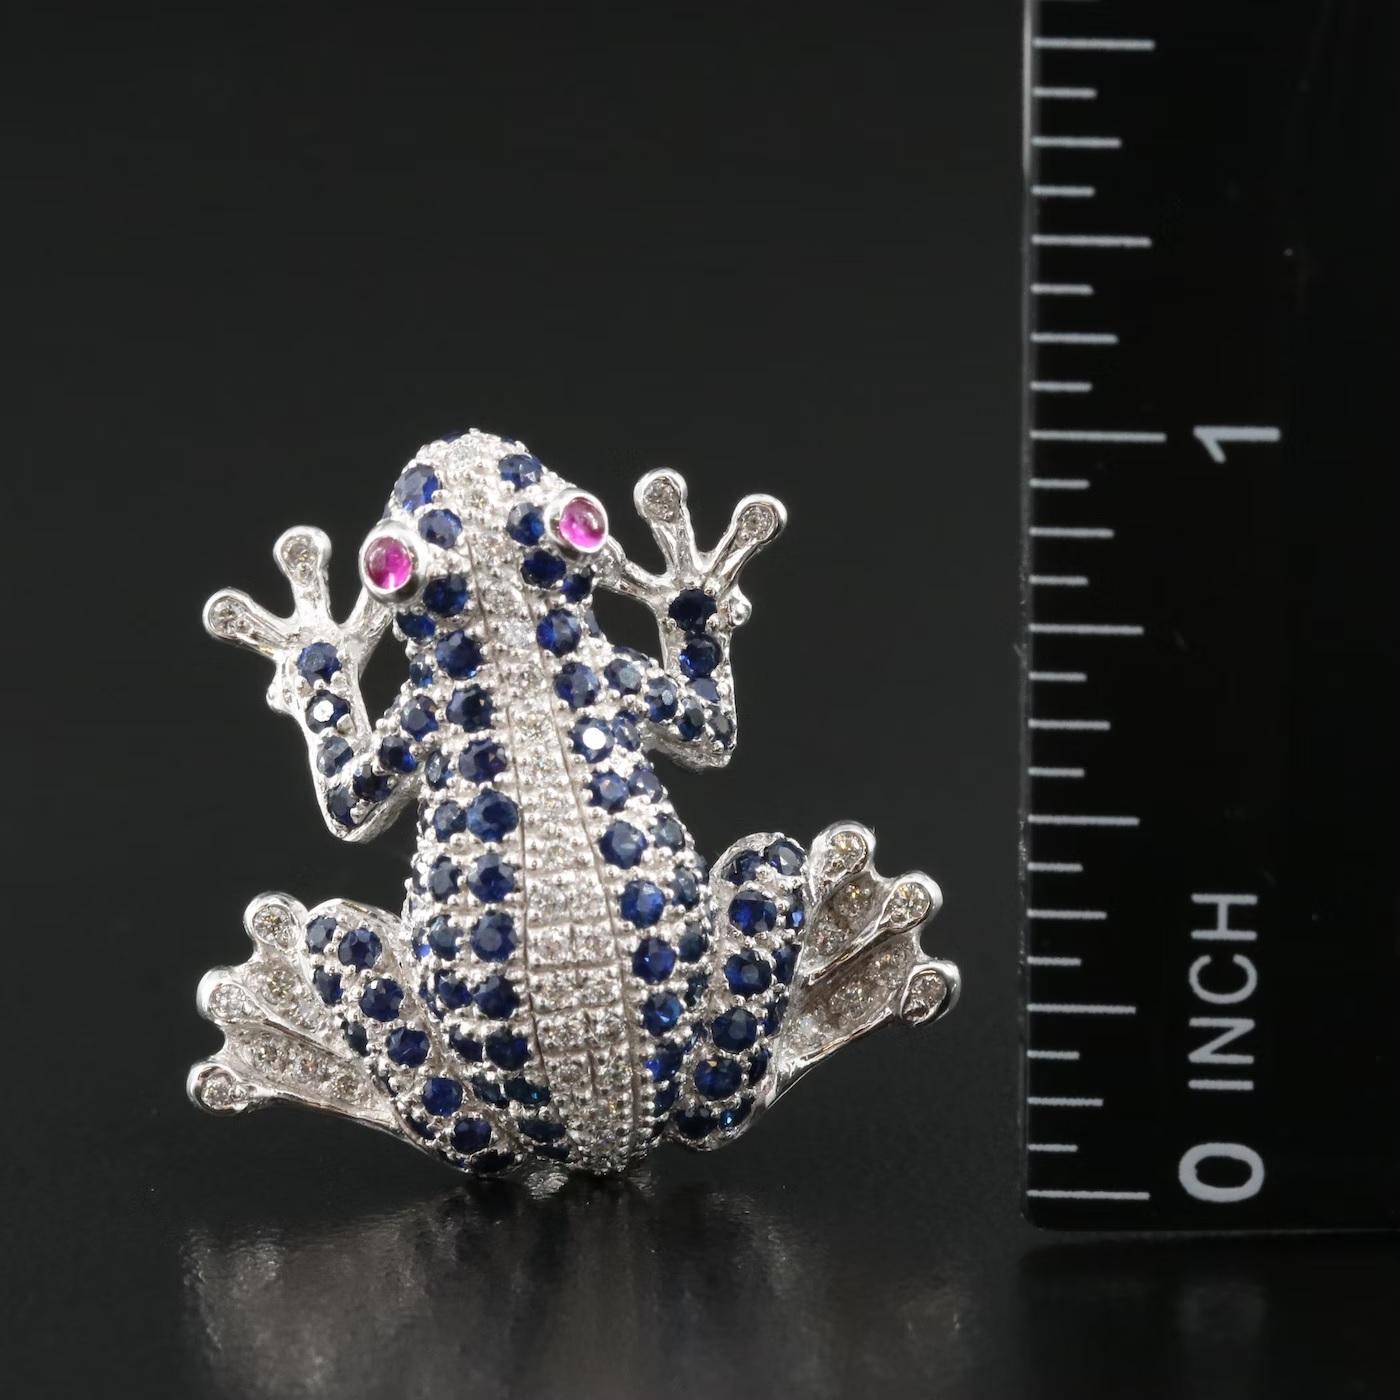 Round Cut $4950 / New / Levian 3D Frog Pendant Brooch / Diamond, Sapphire & Ruby For Sale